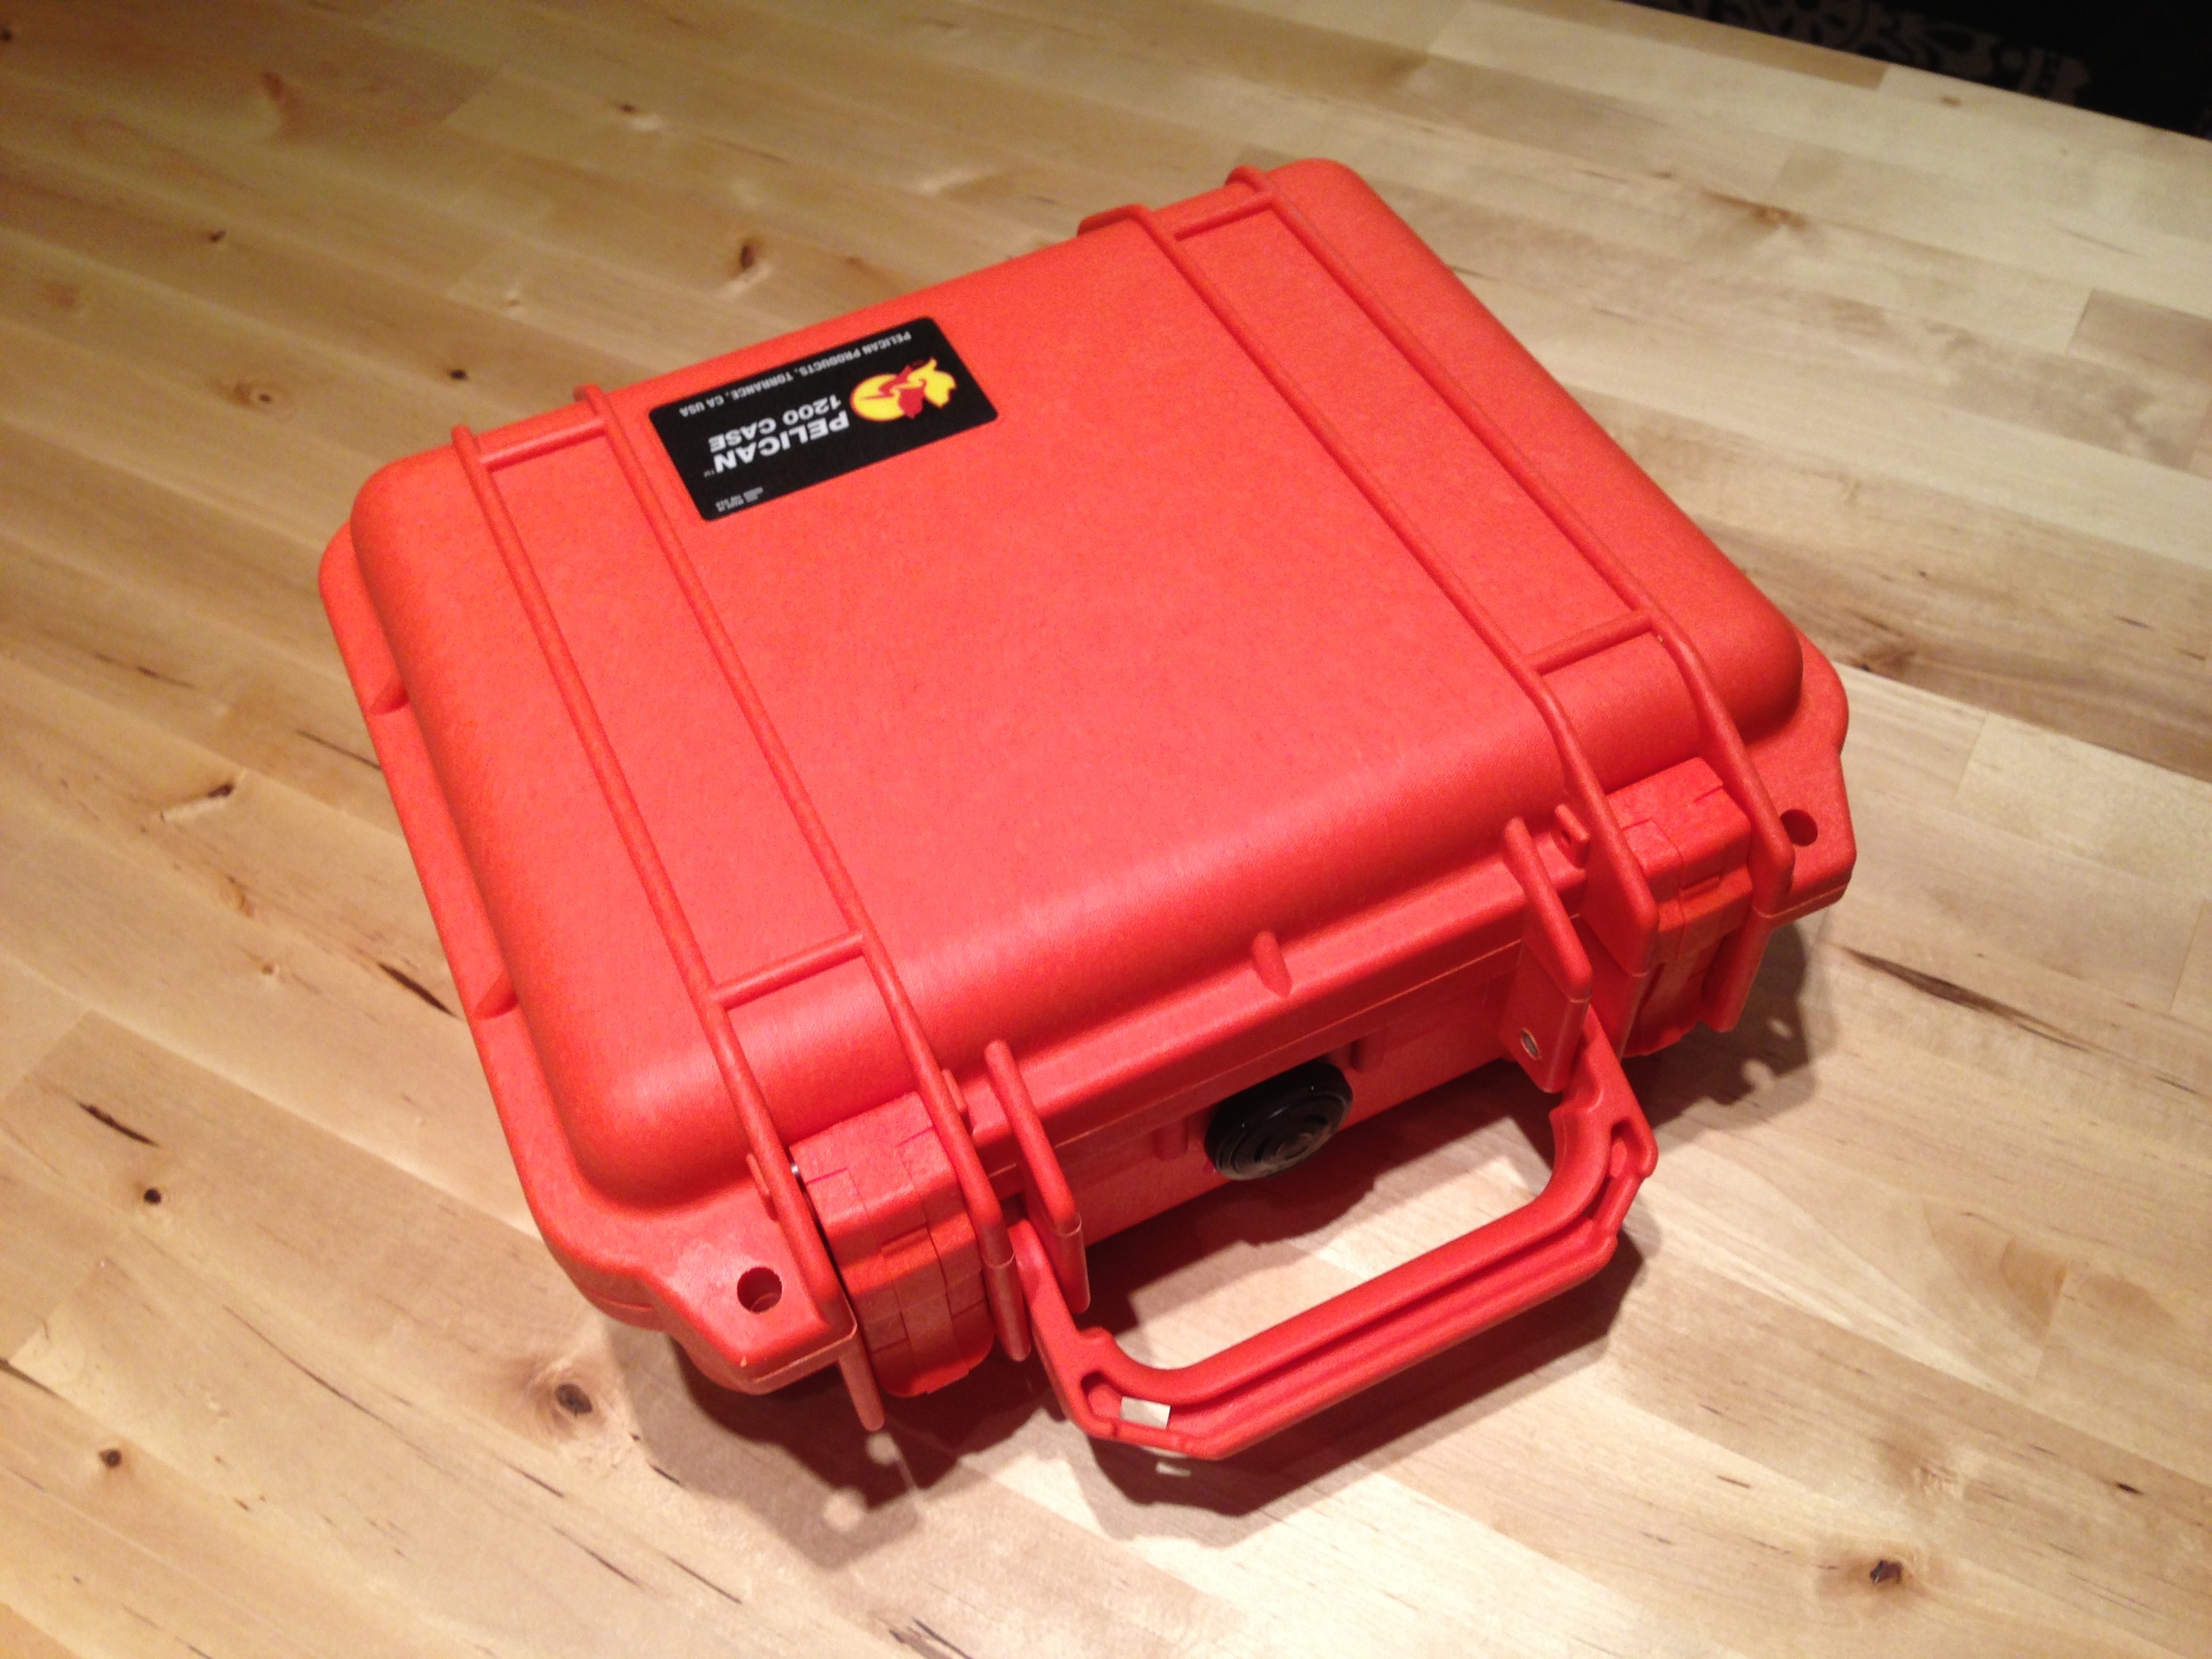  Pelican case- Packed for Adventure! 